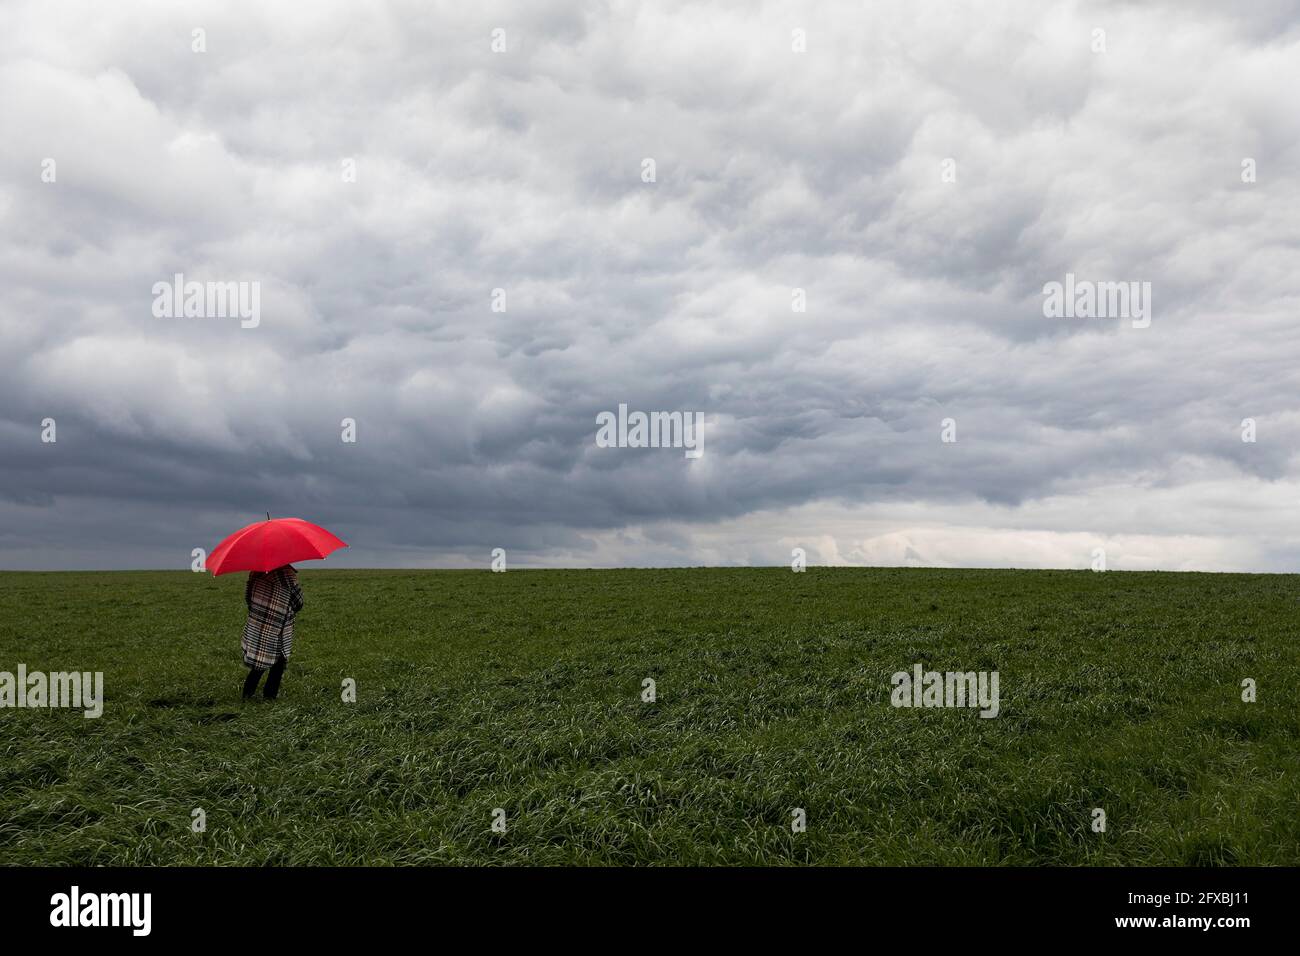 Woman with red umbrella standing in grass during stormy weather Stock Photo